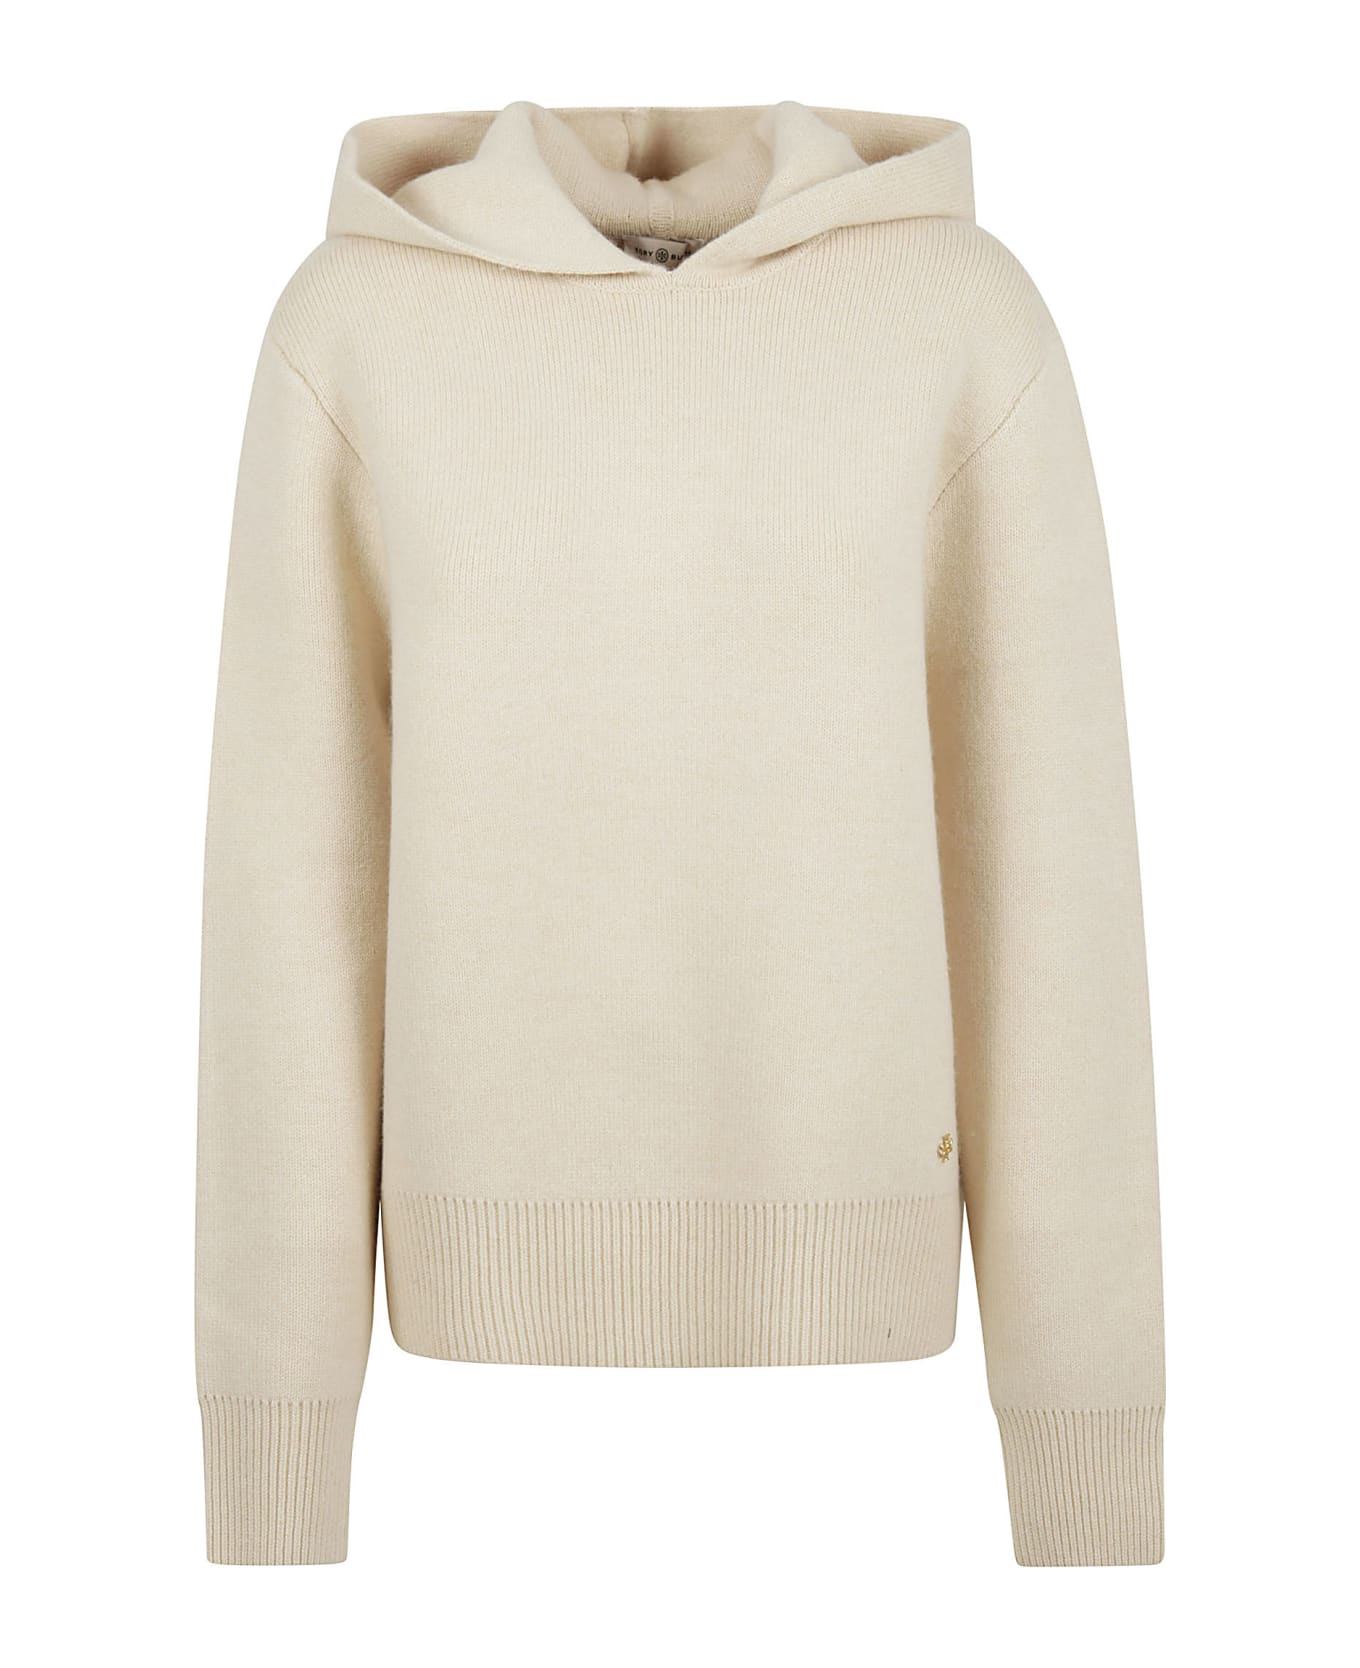 Tory Burch Cashmere Blend Hoodie - Plage ニットウェア